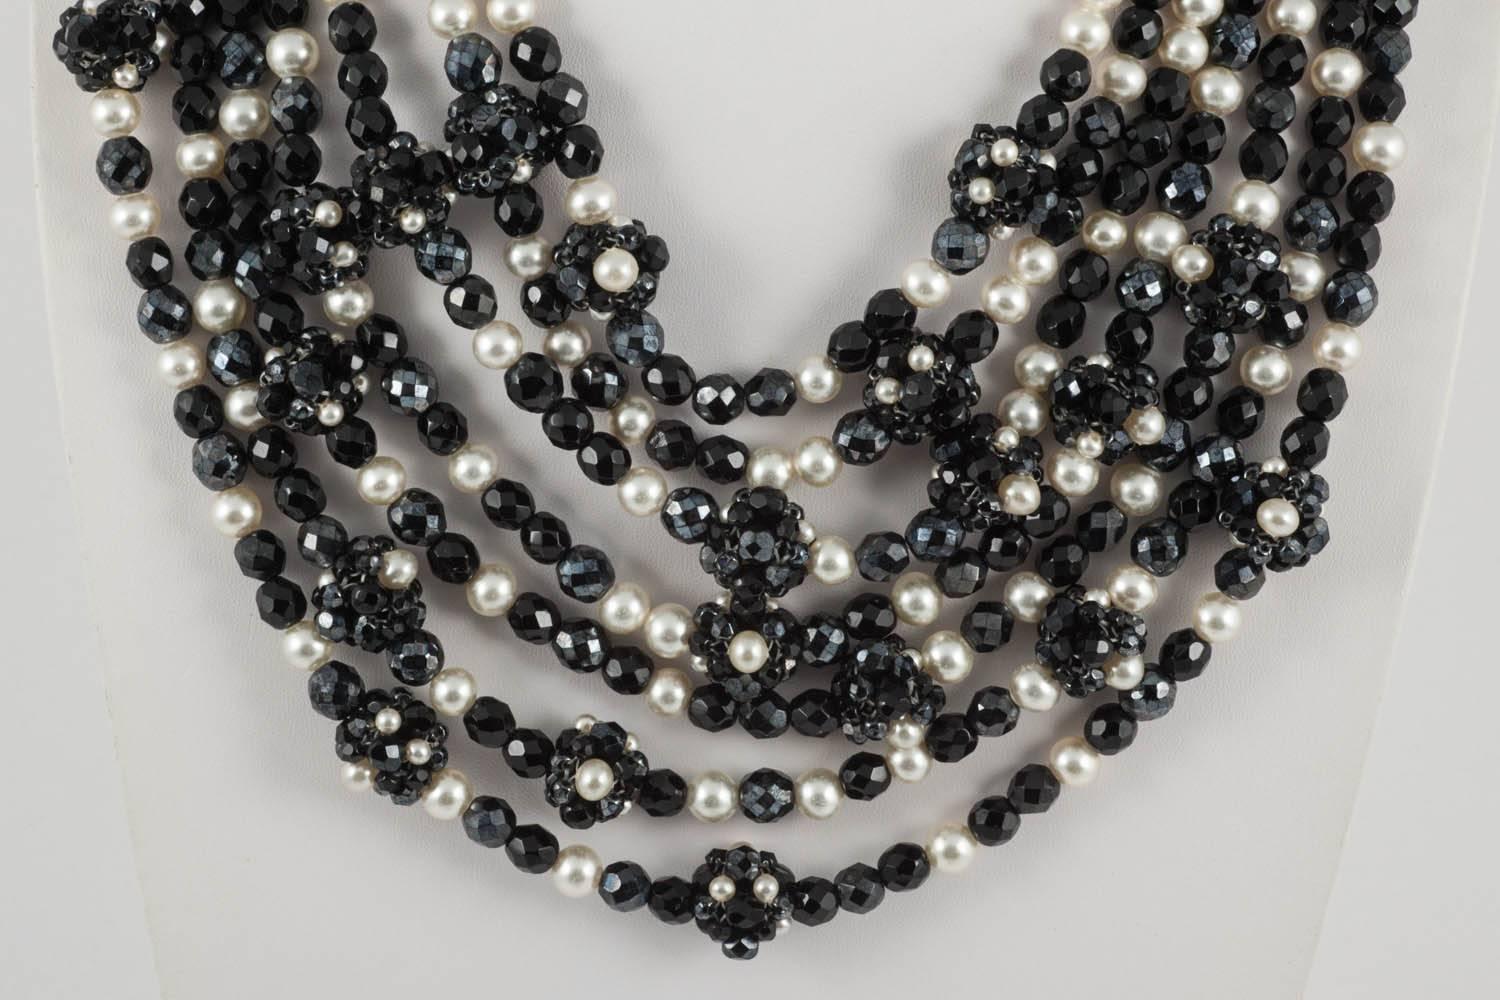 An important and statement seven row necklace from Coppola e Toppo, Milan, made with their signature bead encrusted clasp, and the unusual element of handwoven beaded 'balls' interspersed through the rows, also made of black beads and pearls. A